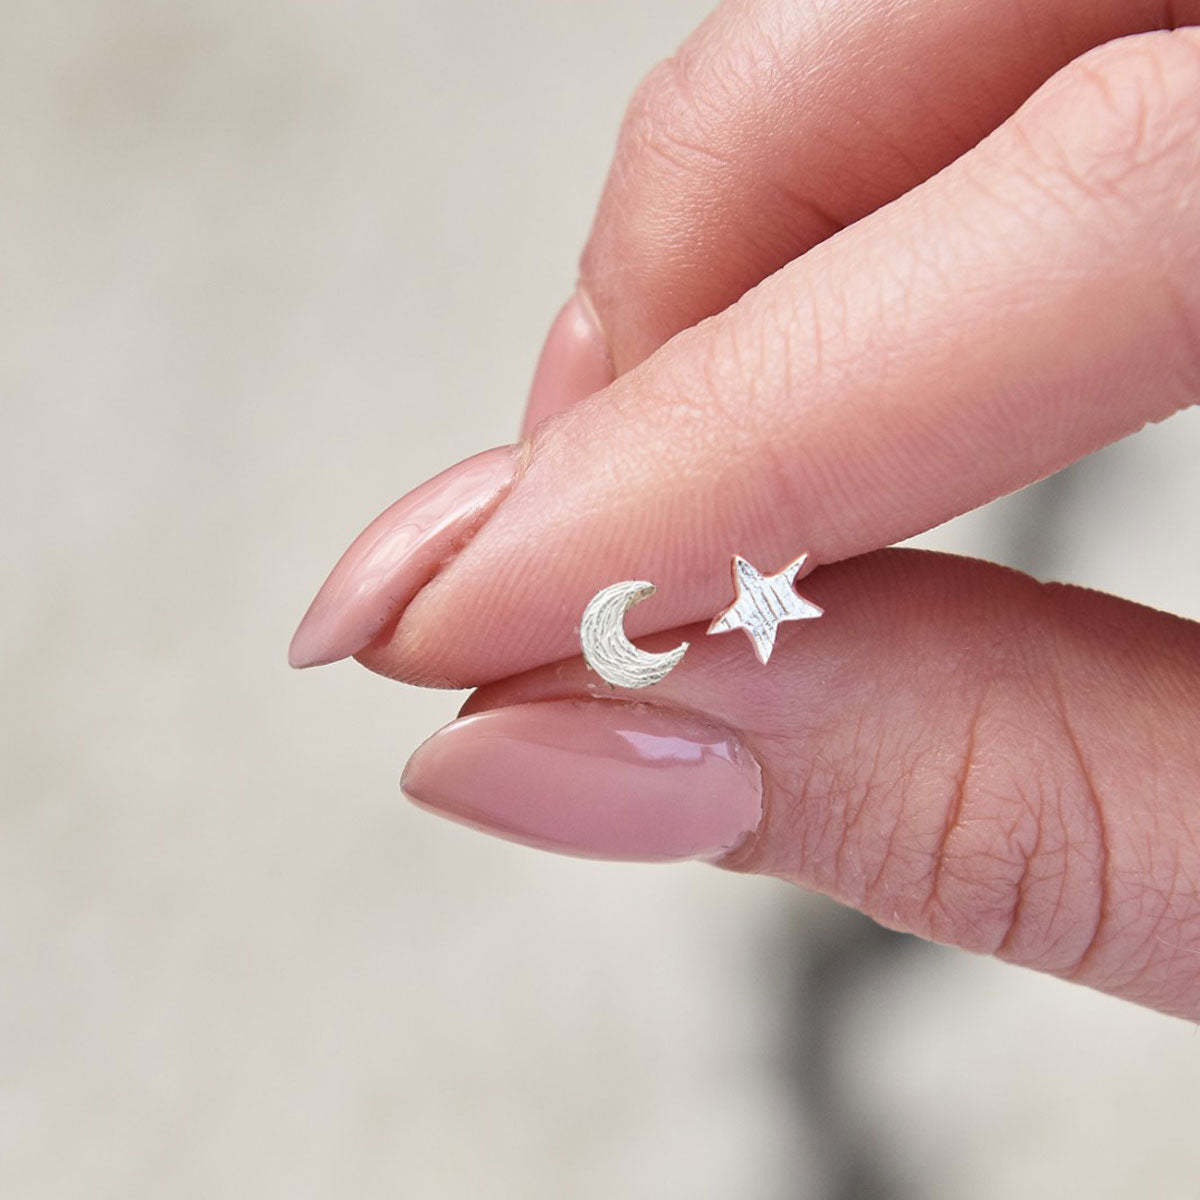 Solid 925 sterling silver mismatched moon and star stud earrings designer Scarlett Jewellery